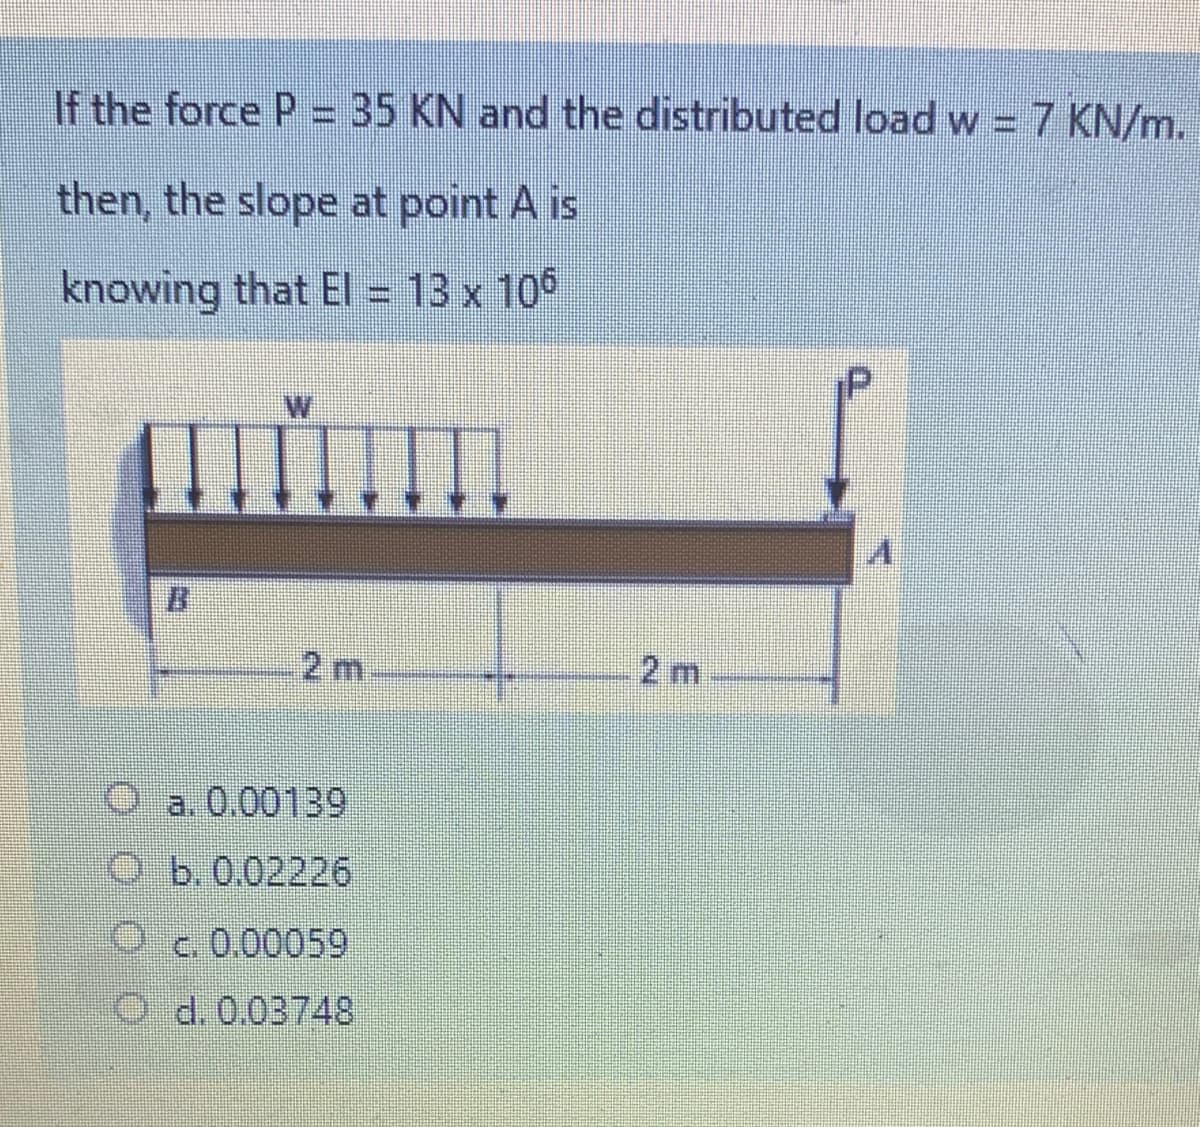 If the force P = 35 KN and the distributed load w = 7 KN/m.
then, the slope at point A is
knowing that EI = 13 x 10°
P
W
B.
2 m
2 m
O a. 0.00139
O b.0.02226
c. 0.00059
O d.0.03748
